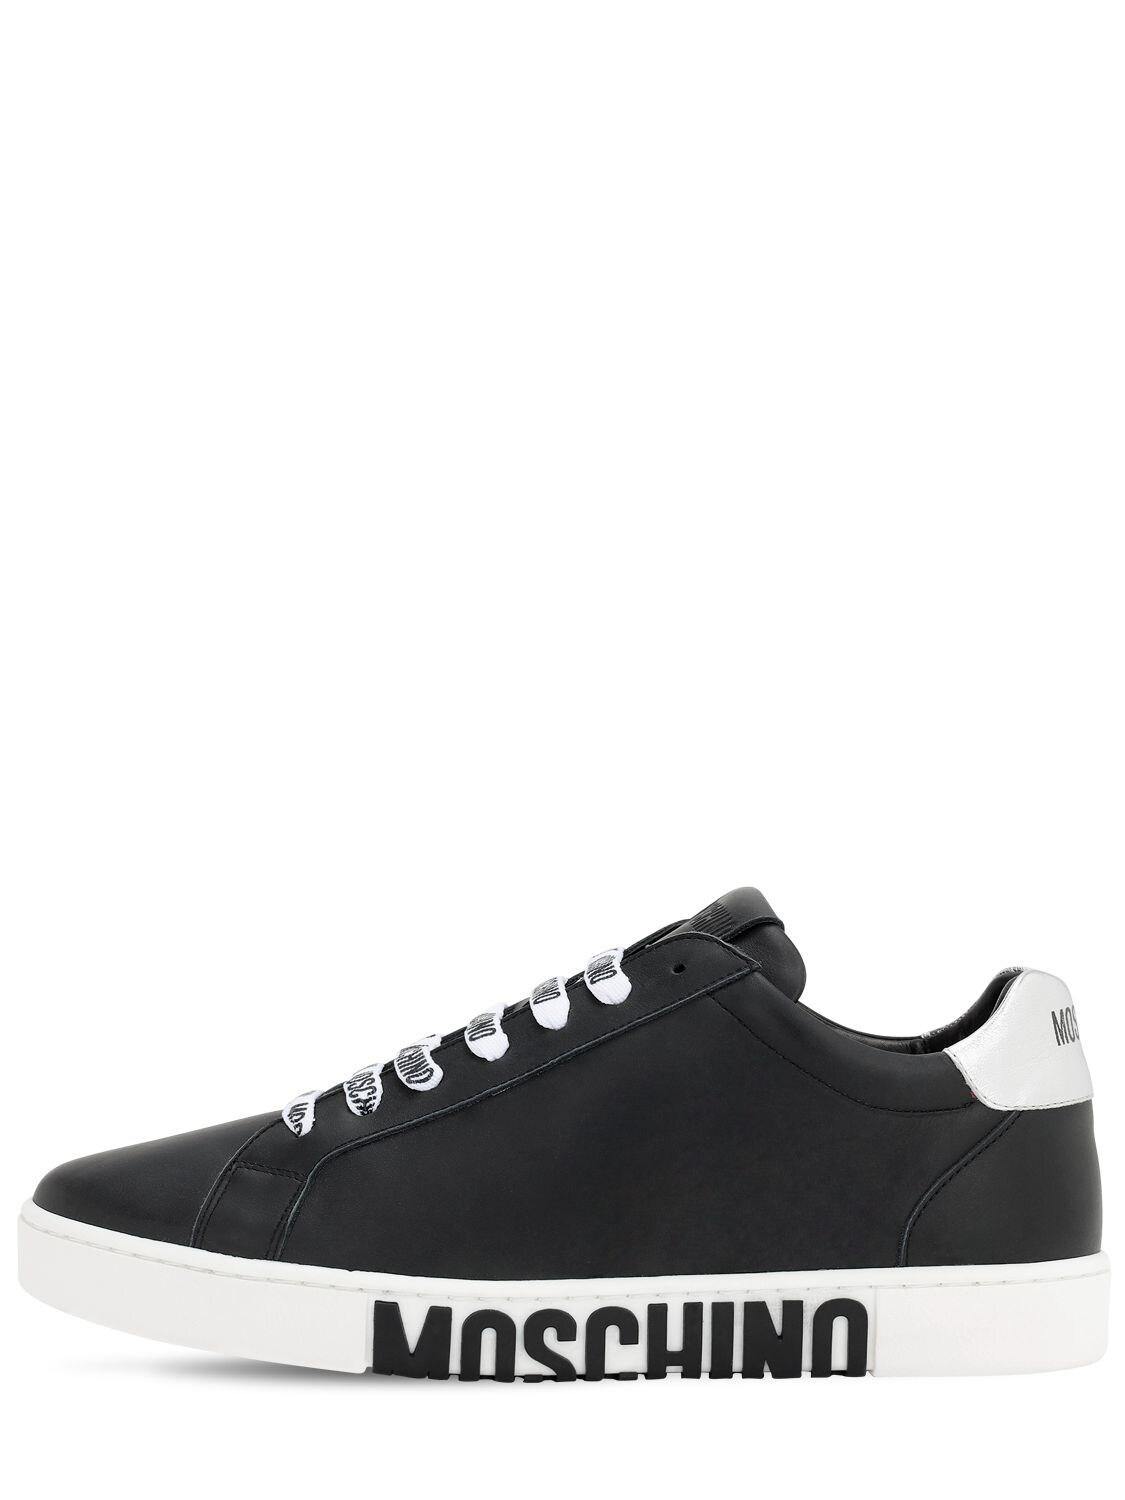 Moschino 25mm Logo Leather Sneakers in Black for Men - Lyst